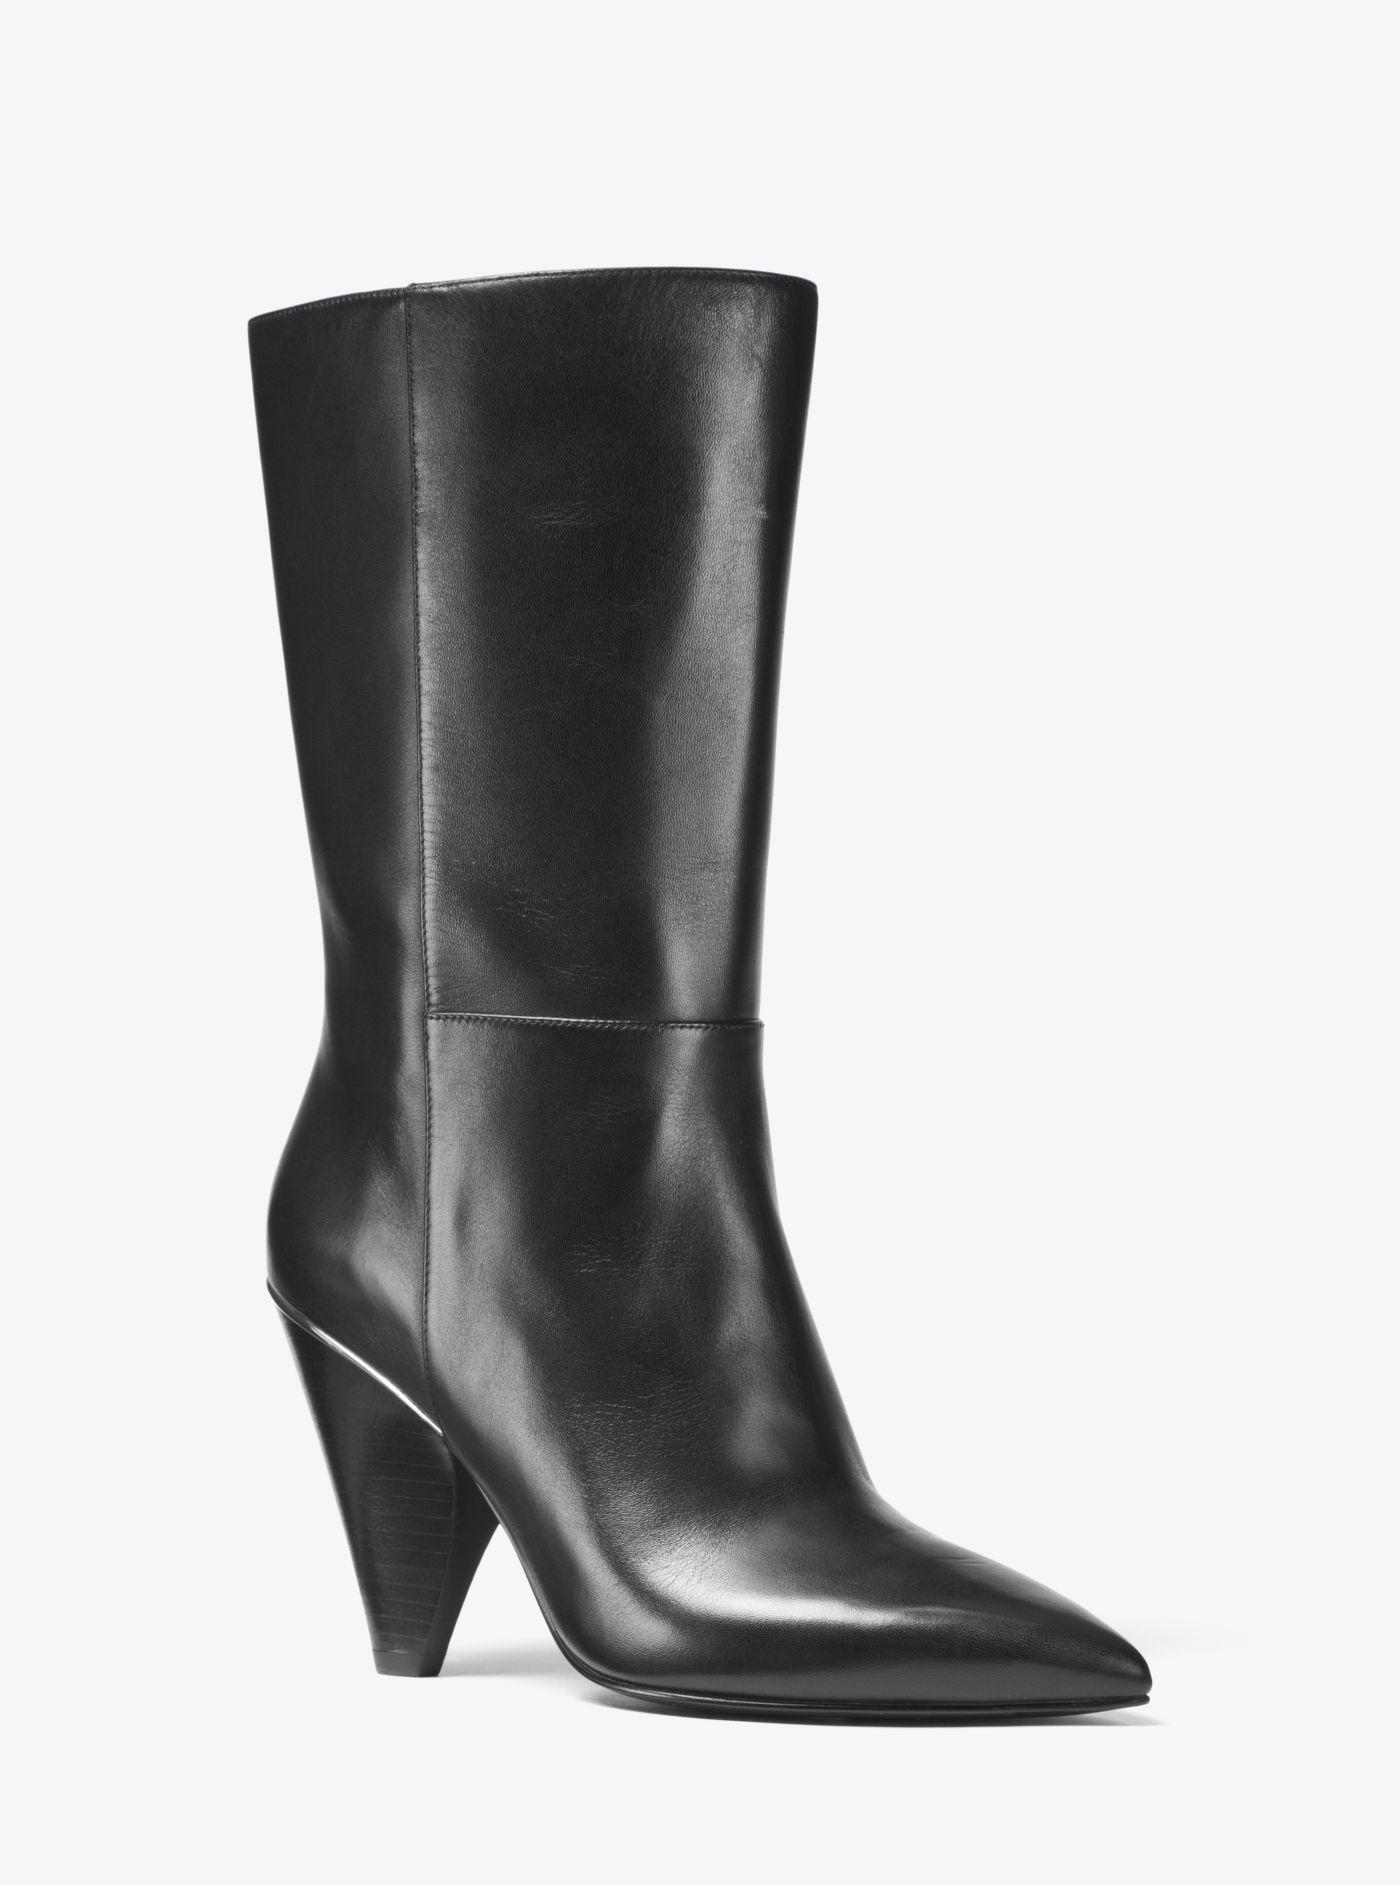 Michael Kors Lizzy Leather Mid-calf in Black - Lyst